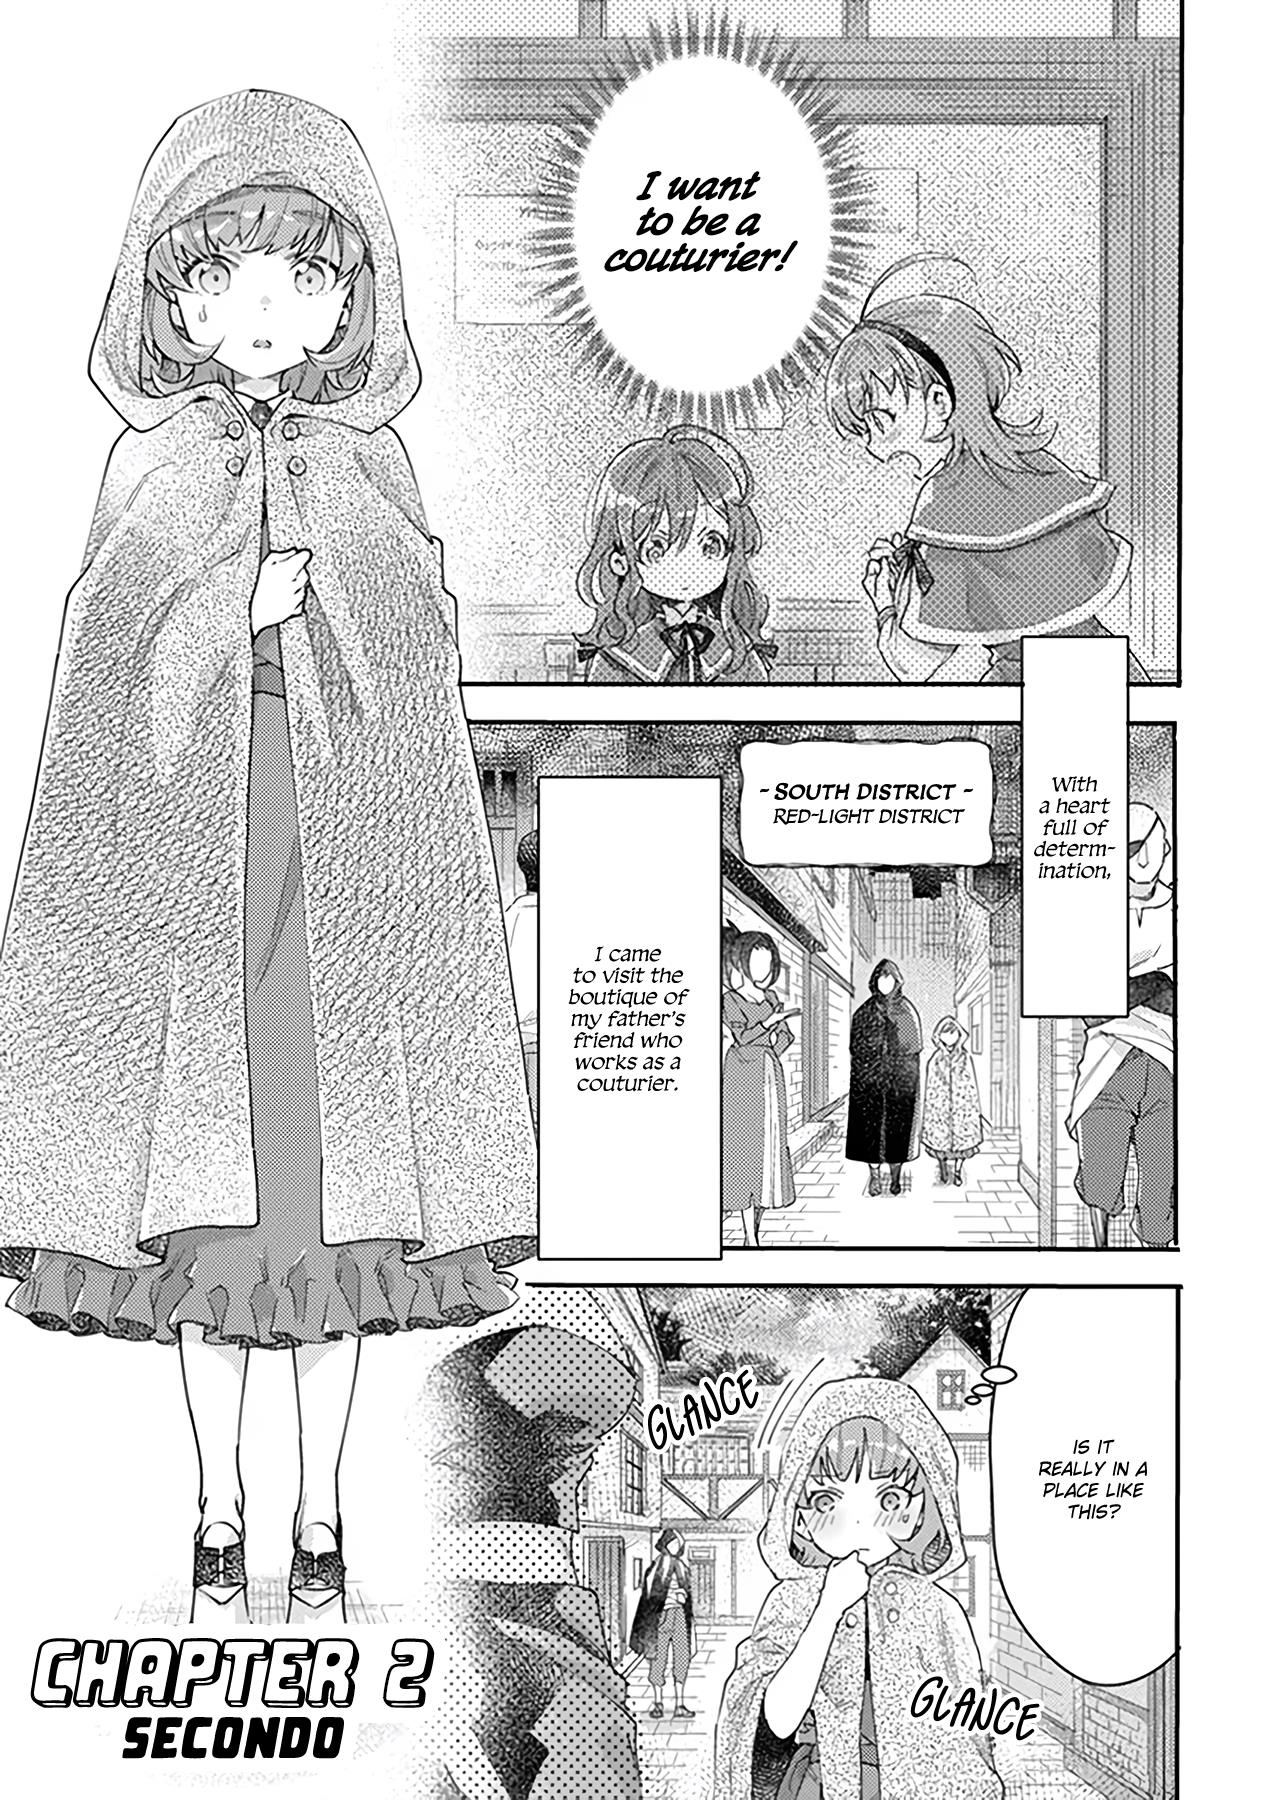 Lucia And The Loom ~Weaving Her Way To Happiness~ Vol.1 Chapter 2: Secondo - Picture 2